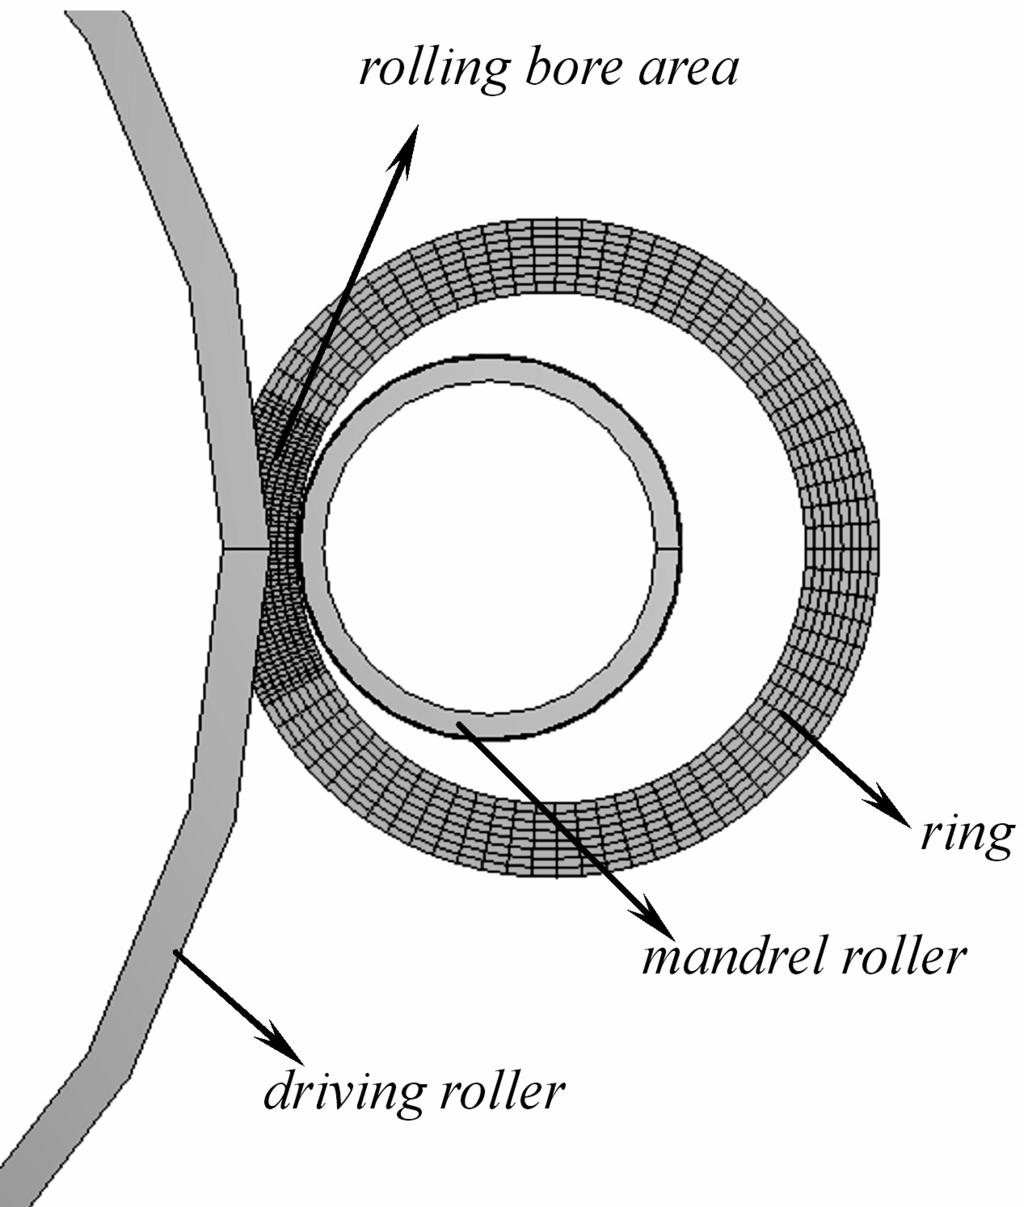 penetration of groove ball-section ring rolling are researched.